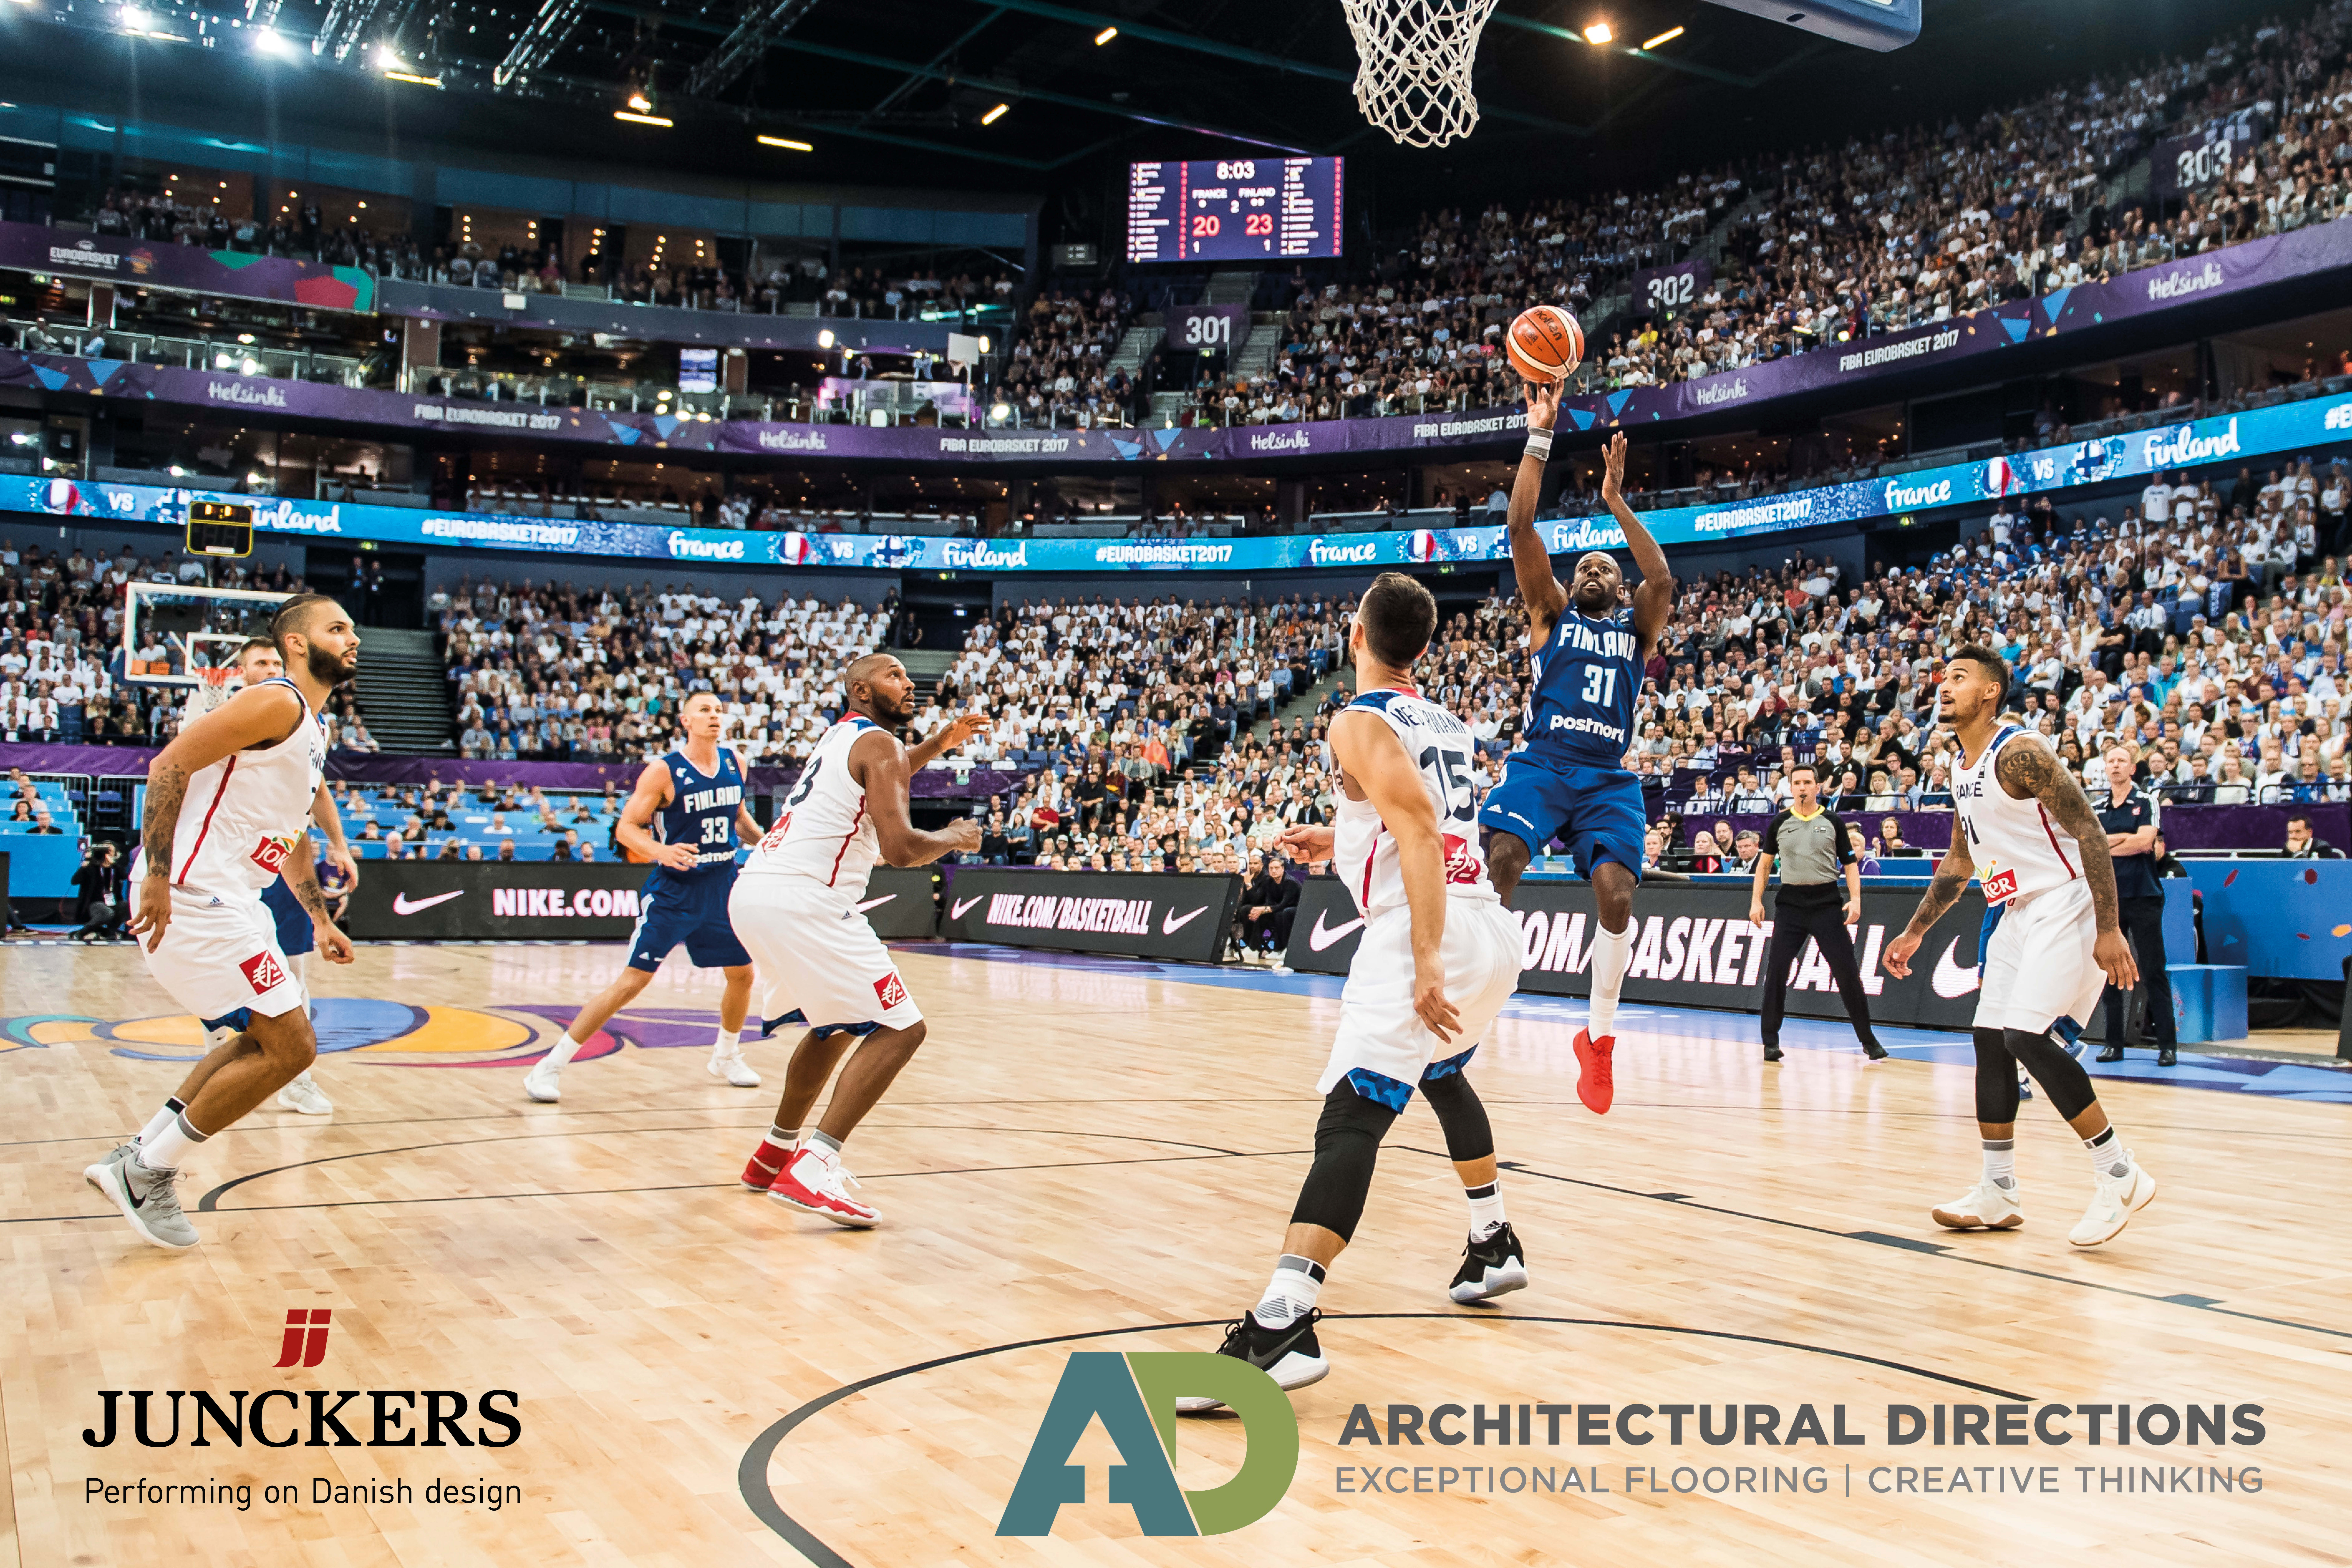 NBA basketball game action photo featuring Junkers flooring on basketball court